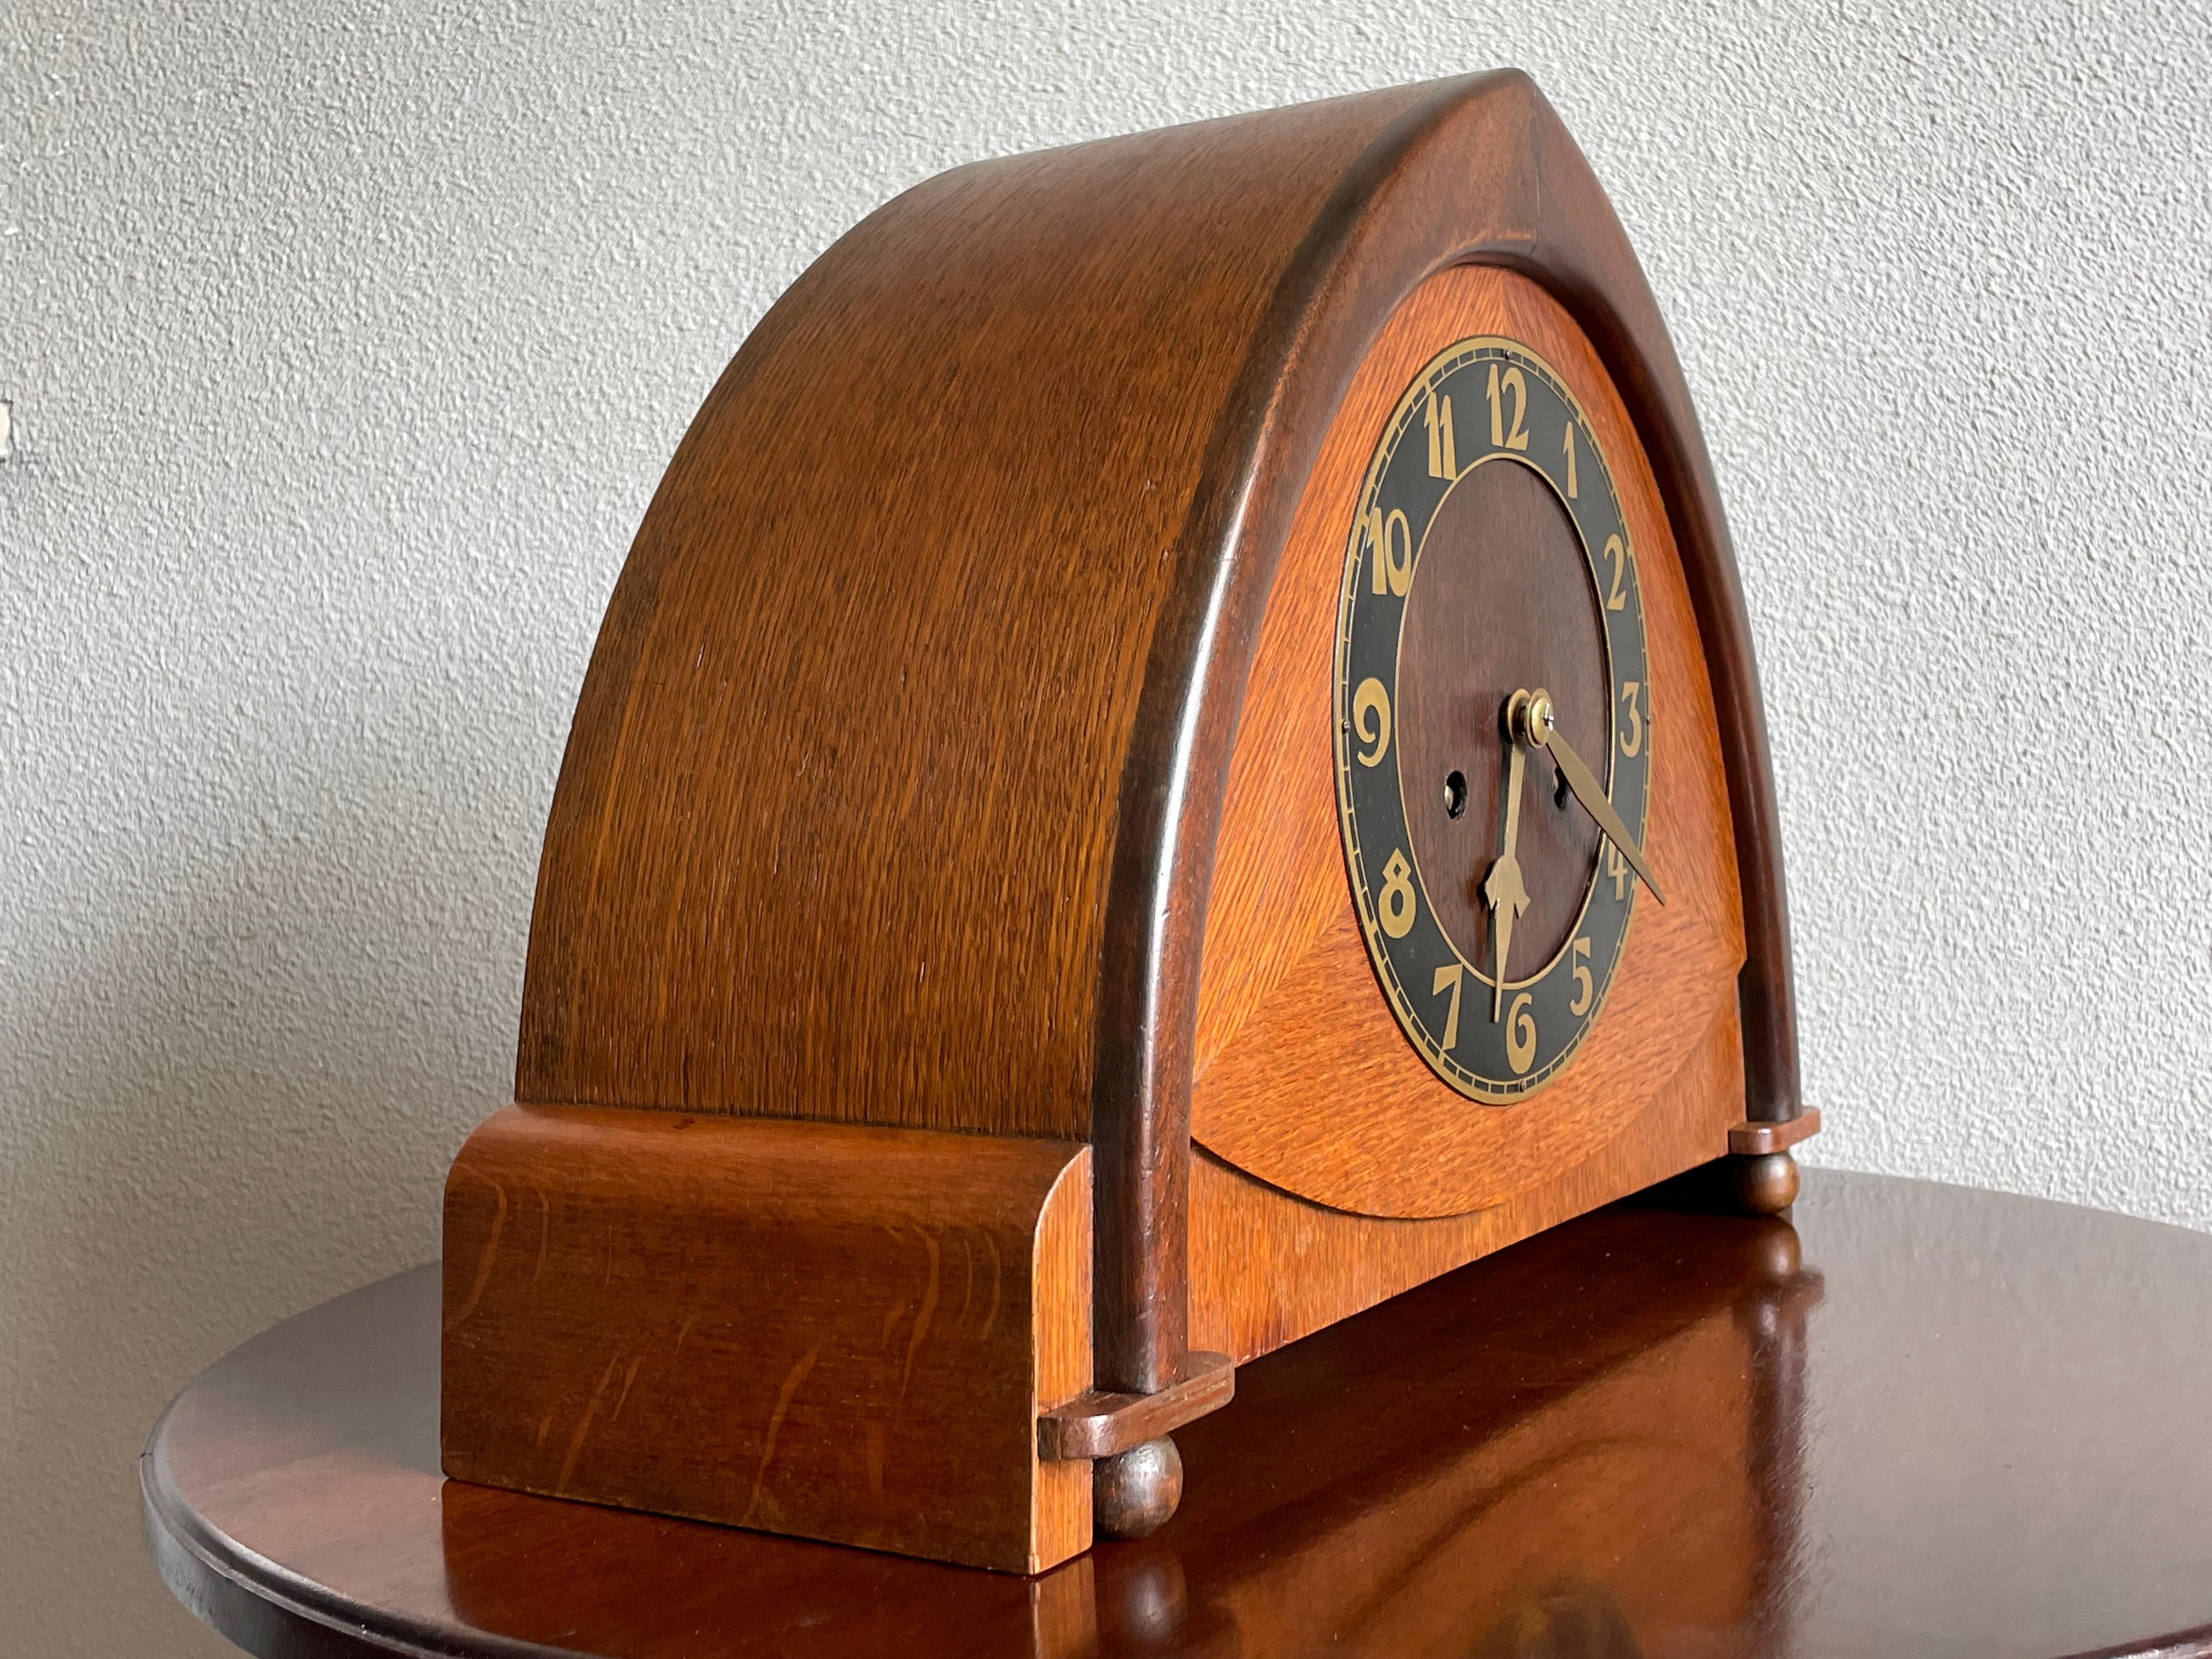 Dutch Arts & Crafts Wooden Mantle or Desk Clock w. Stunning Brass Dial Face 1915 For Sale 1